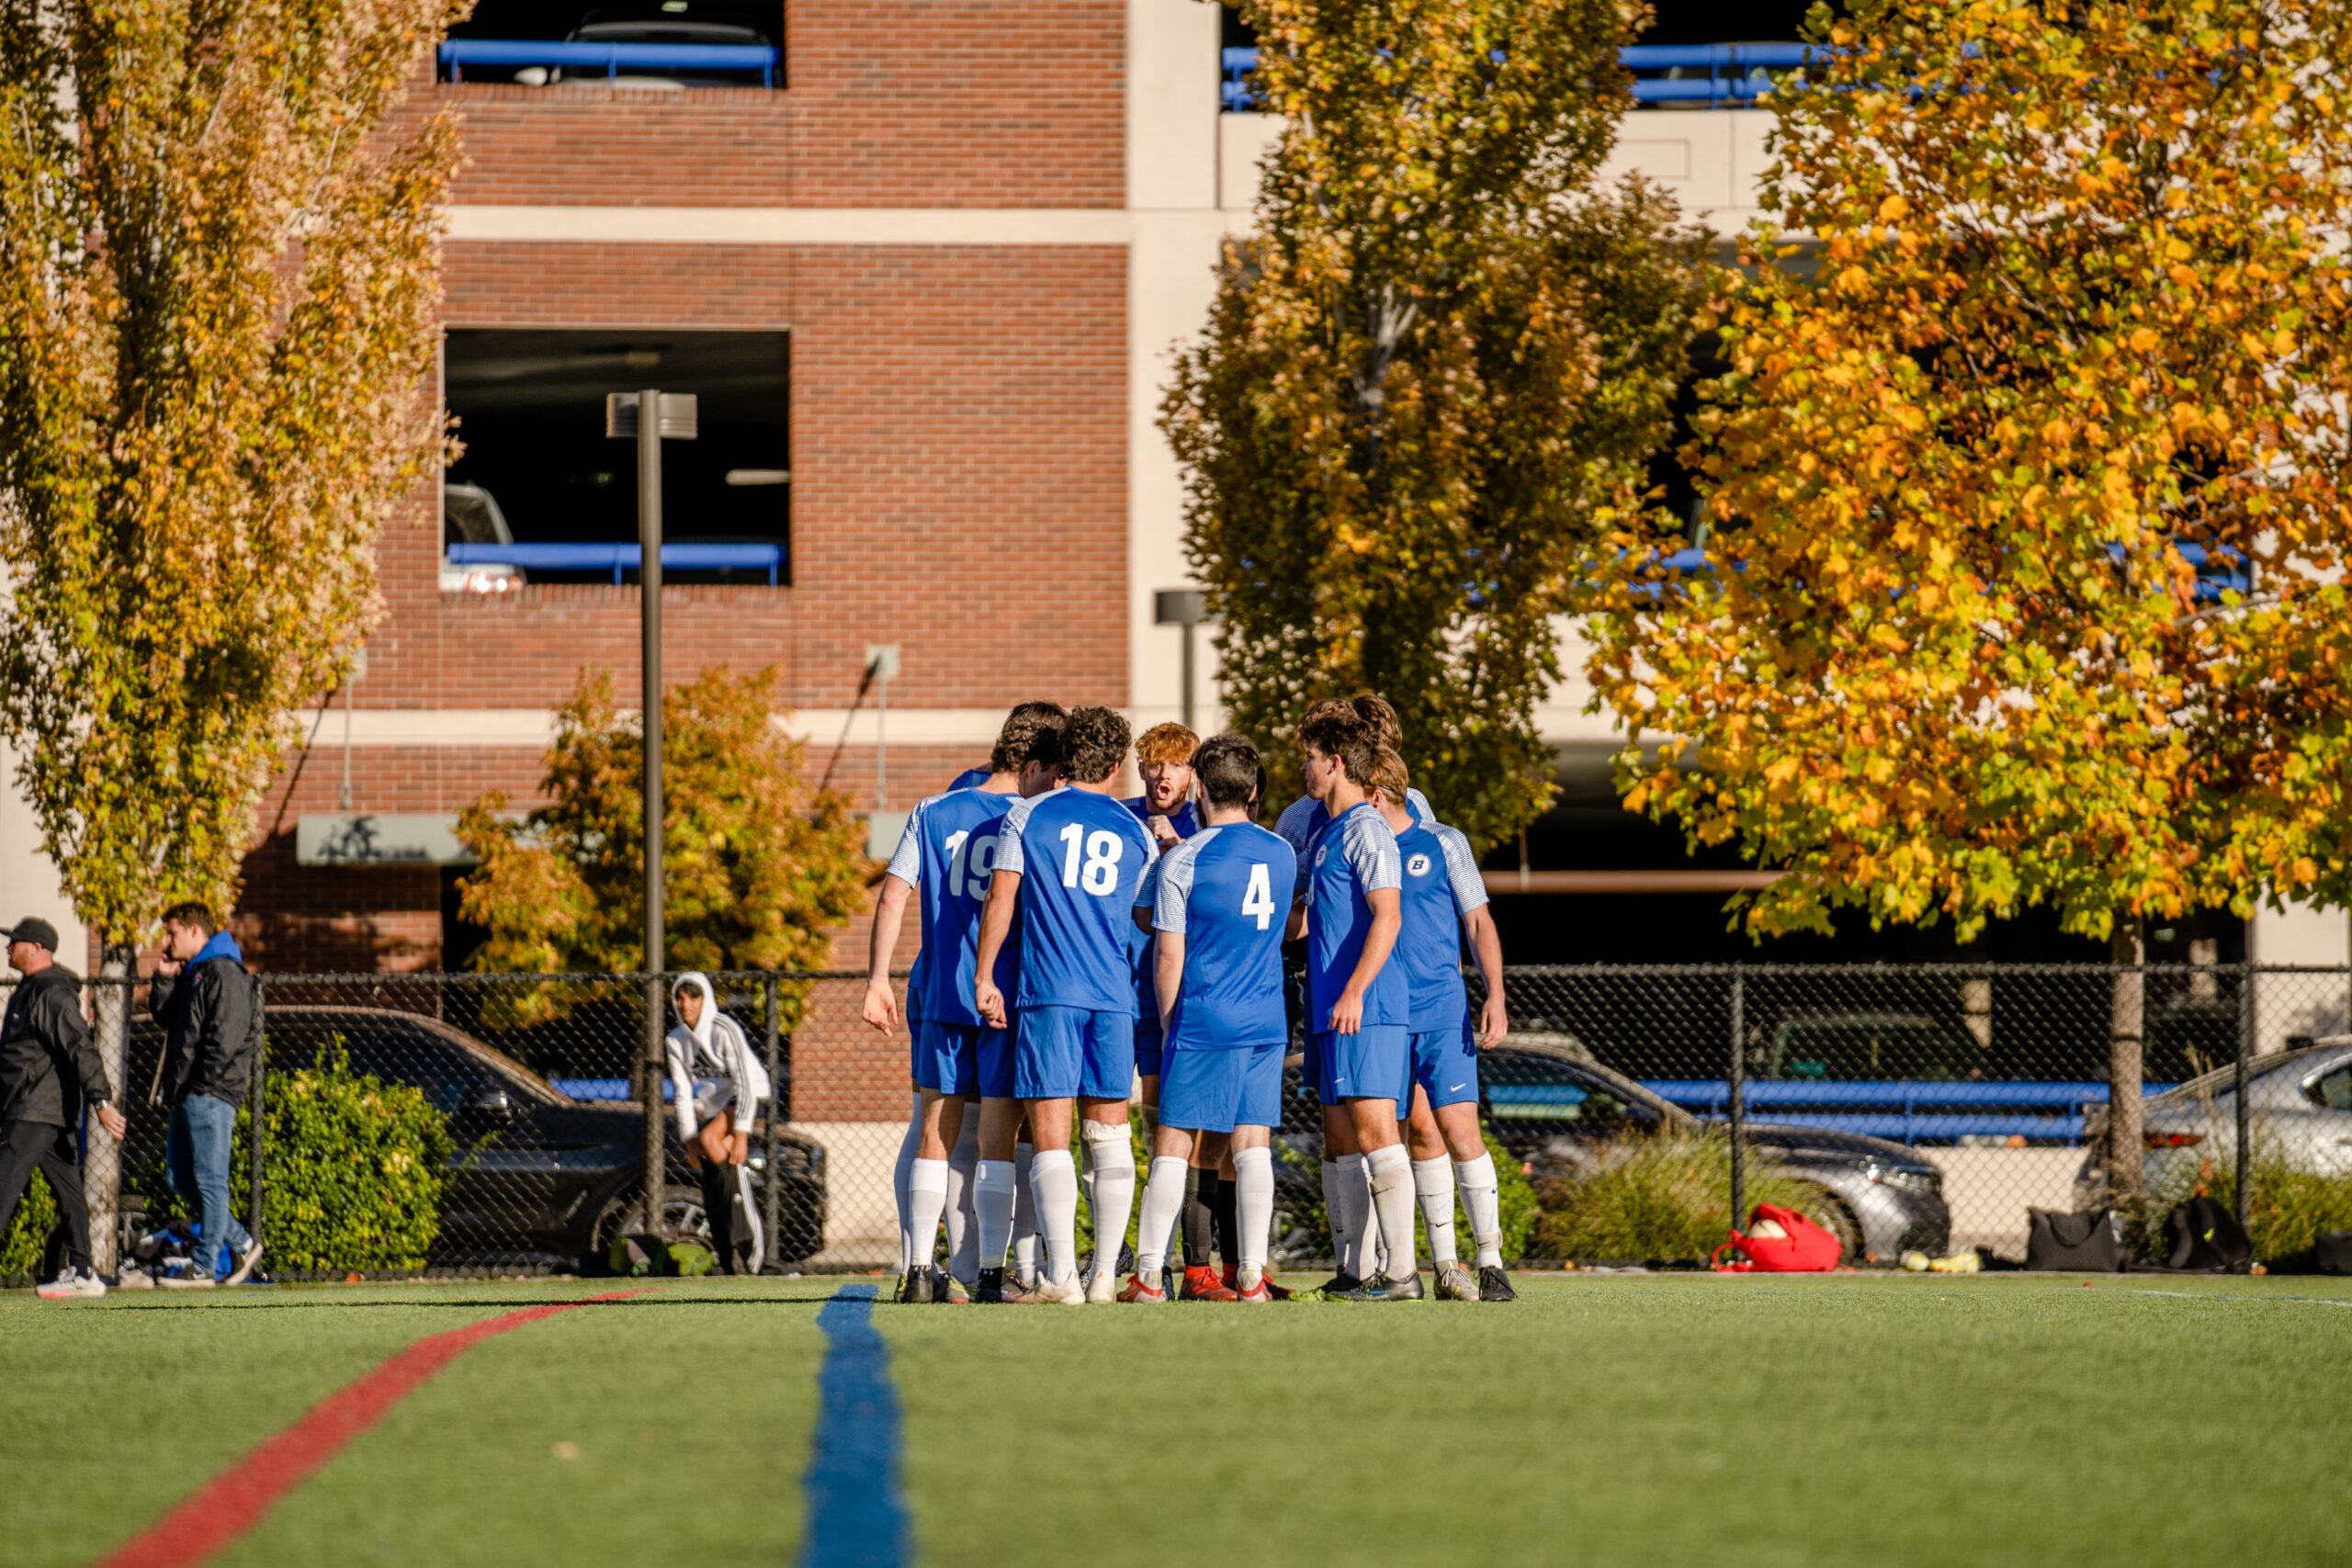 Zack Tyree on the soccer field with his teammates as the captain of Boise State men's soccer club